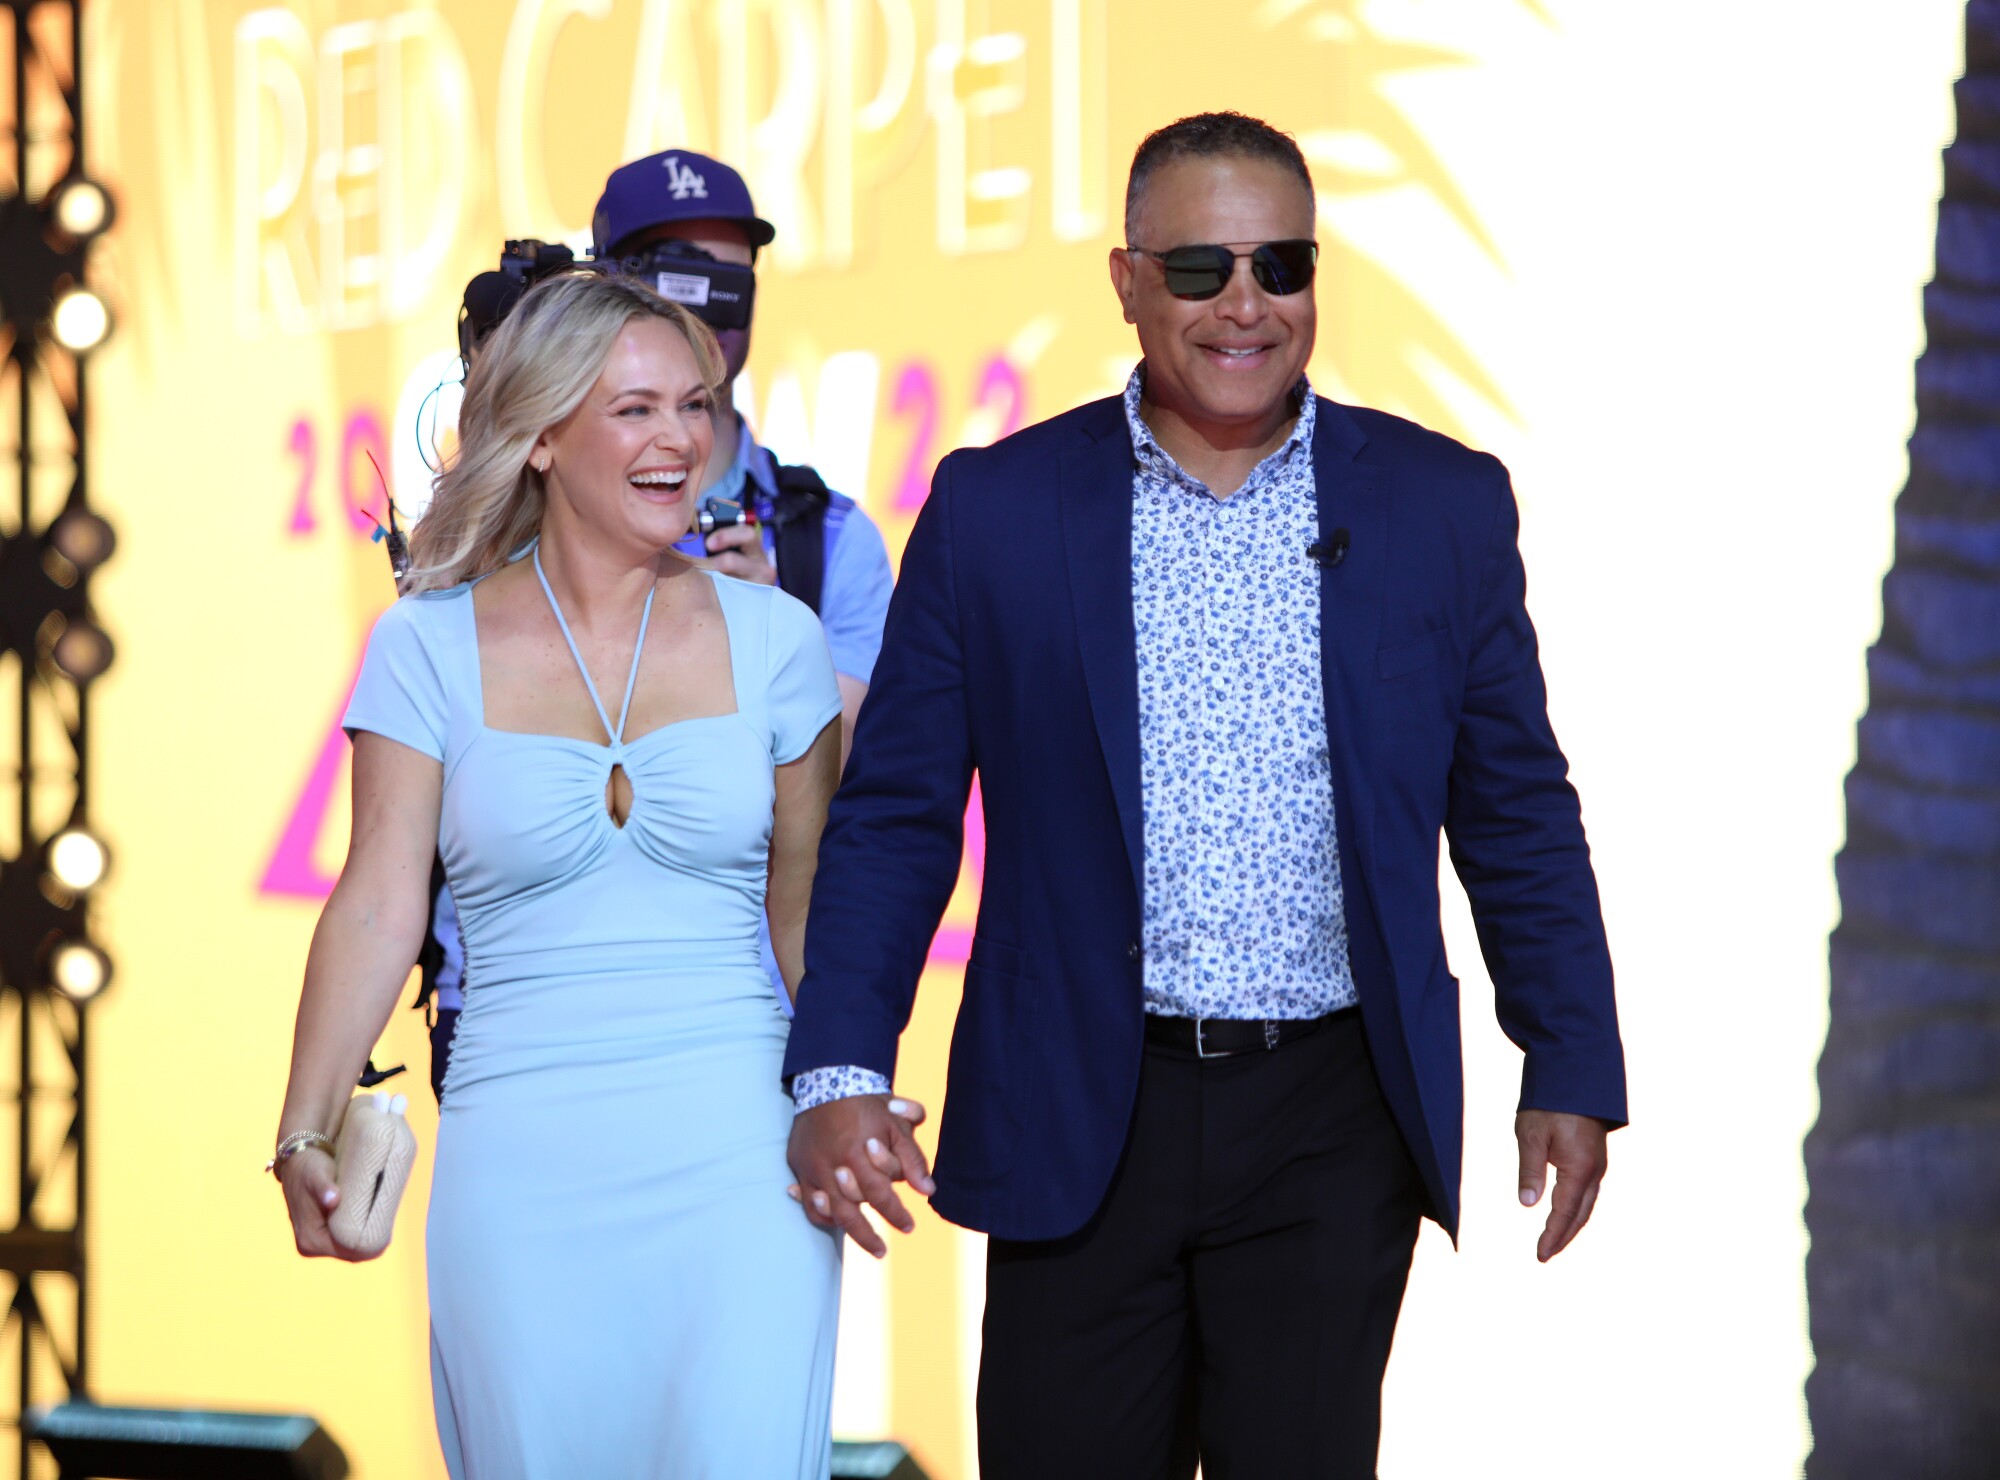 Dodgers manager Dave Roberts arrives with his wife at the 2022 MLB All-Star Game Red Carpet Show.